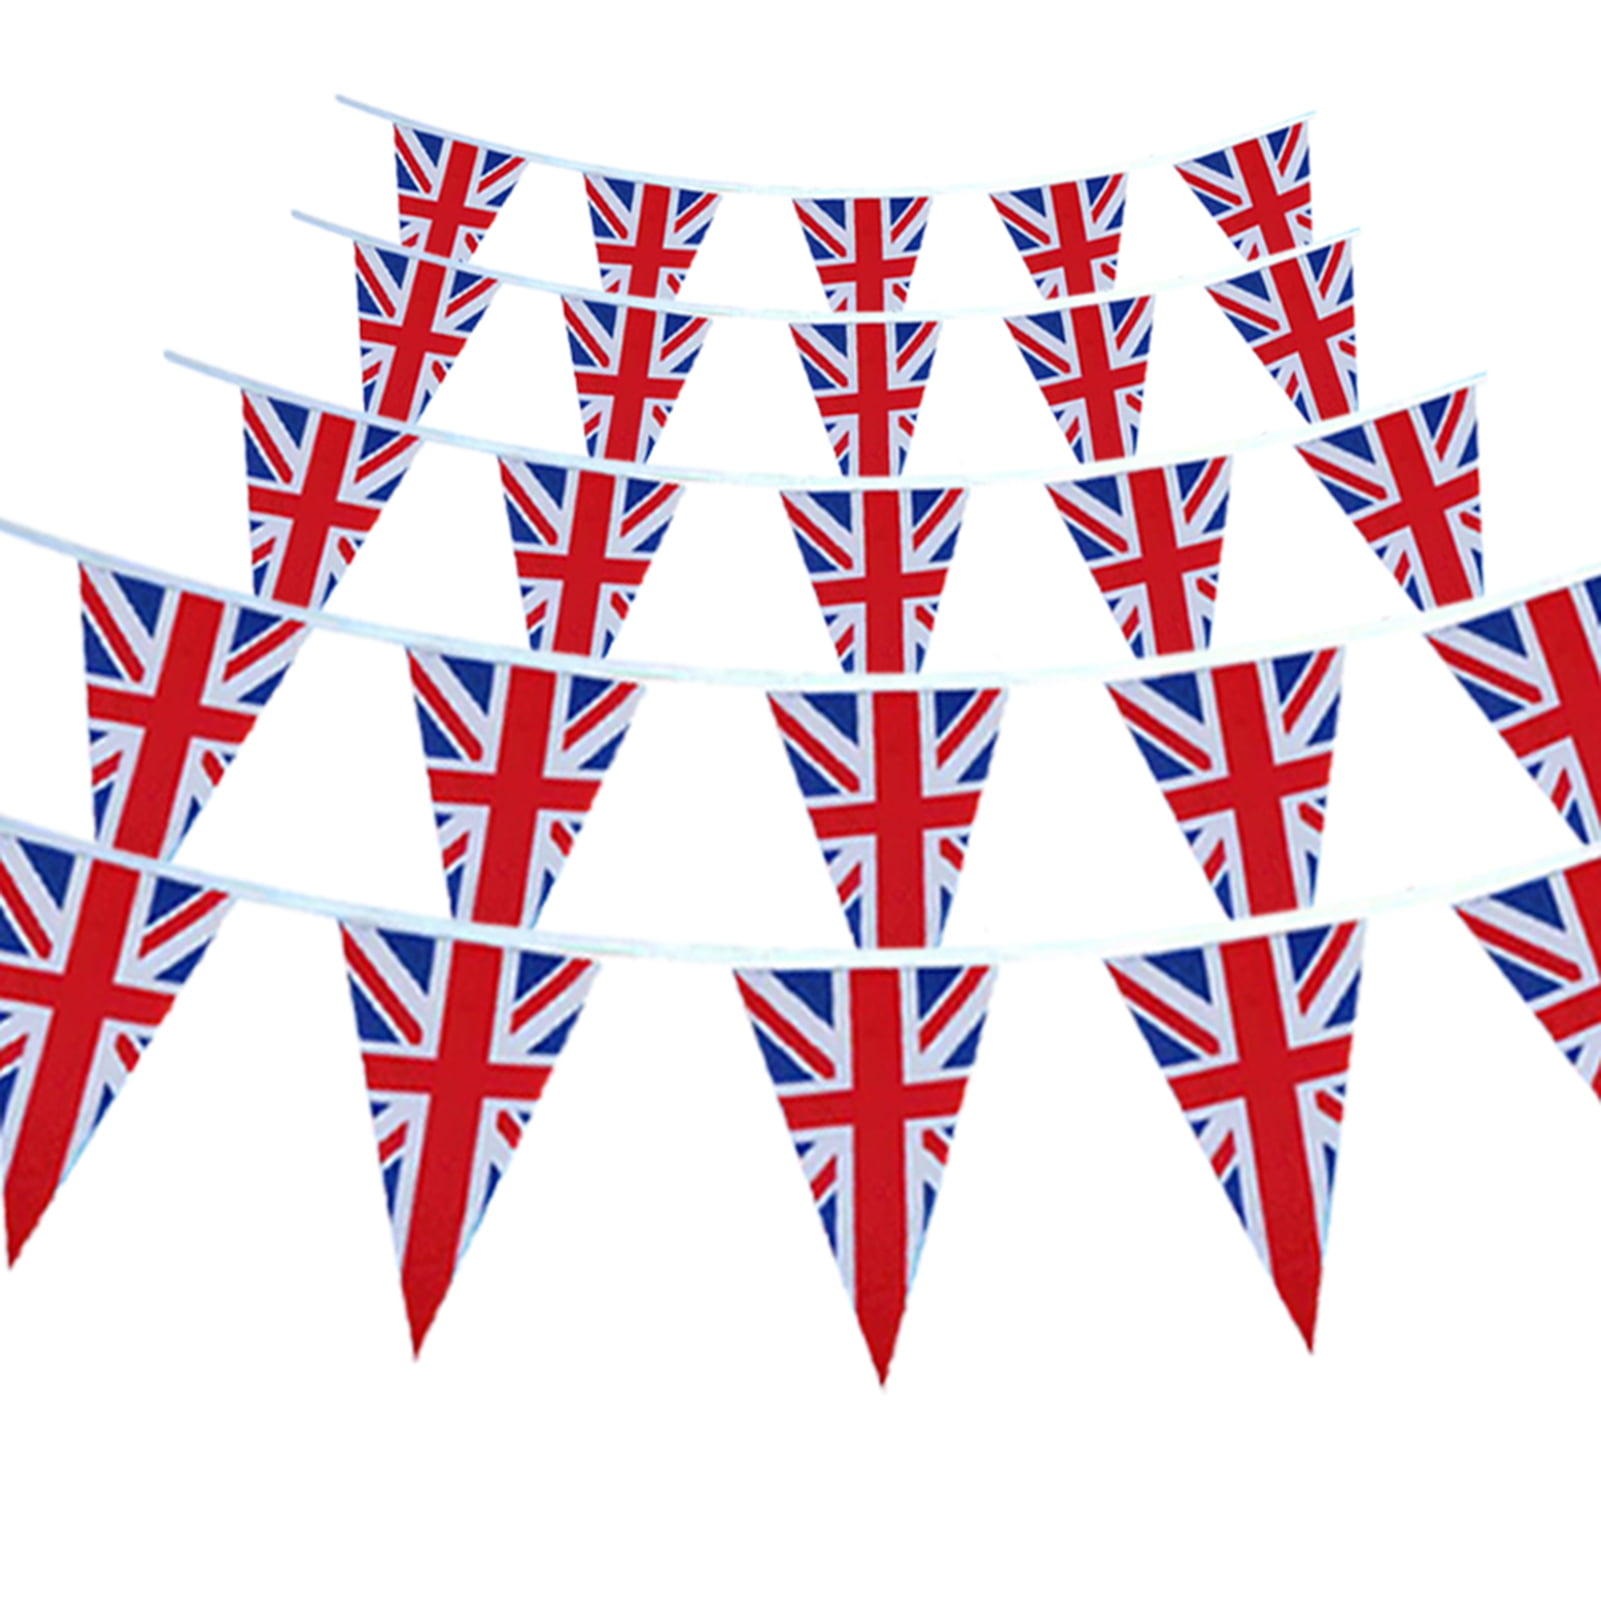 Sale Now On Red Triangle Bunting 12 flags on this 5 meter Long Bunting 